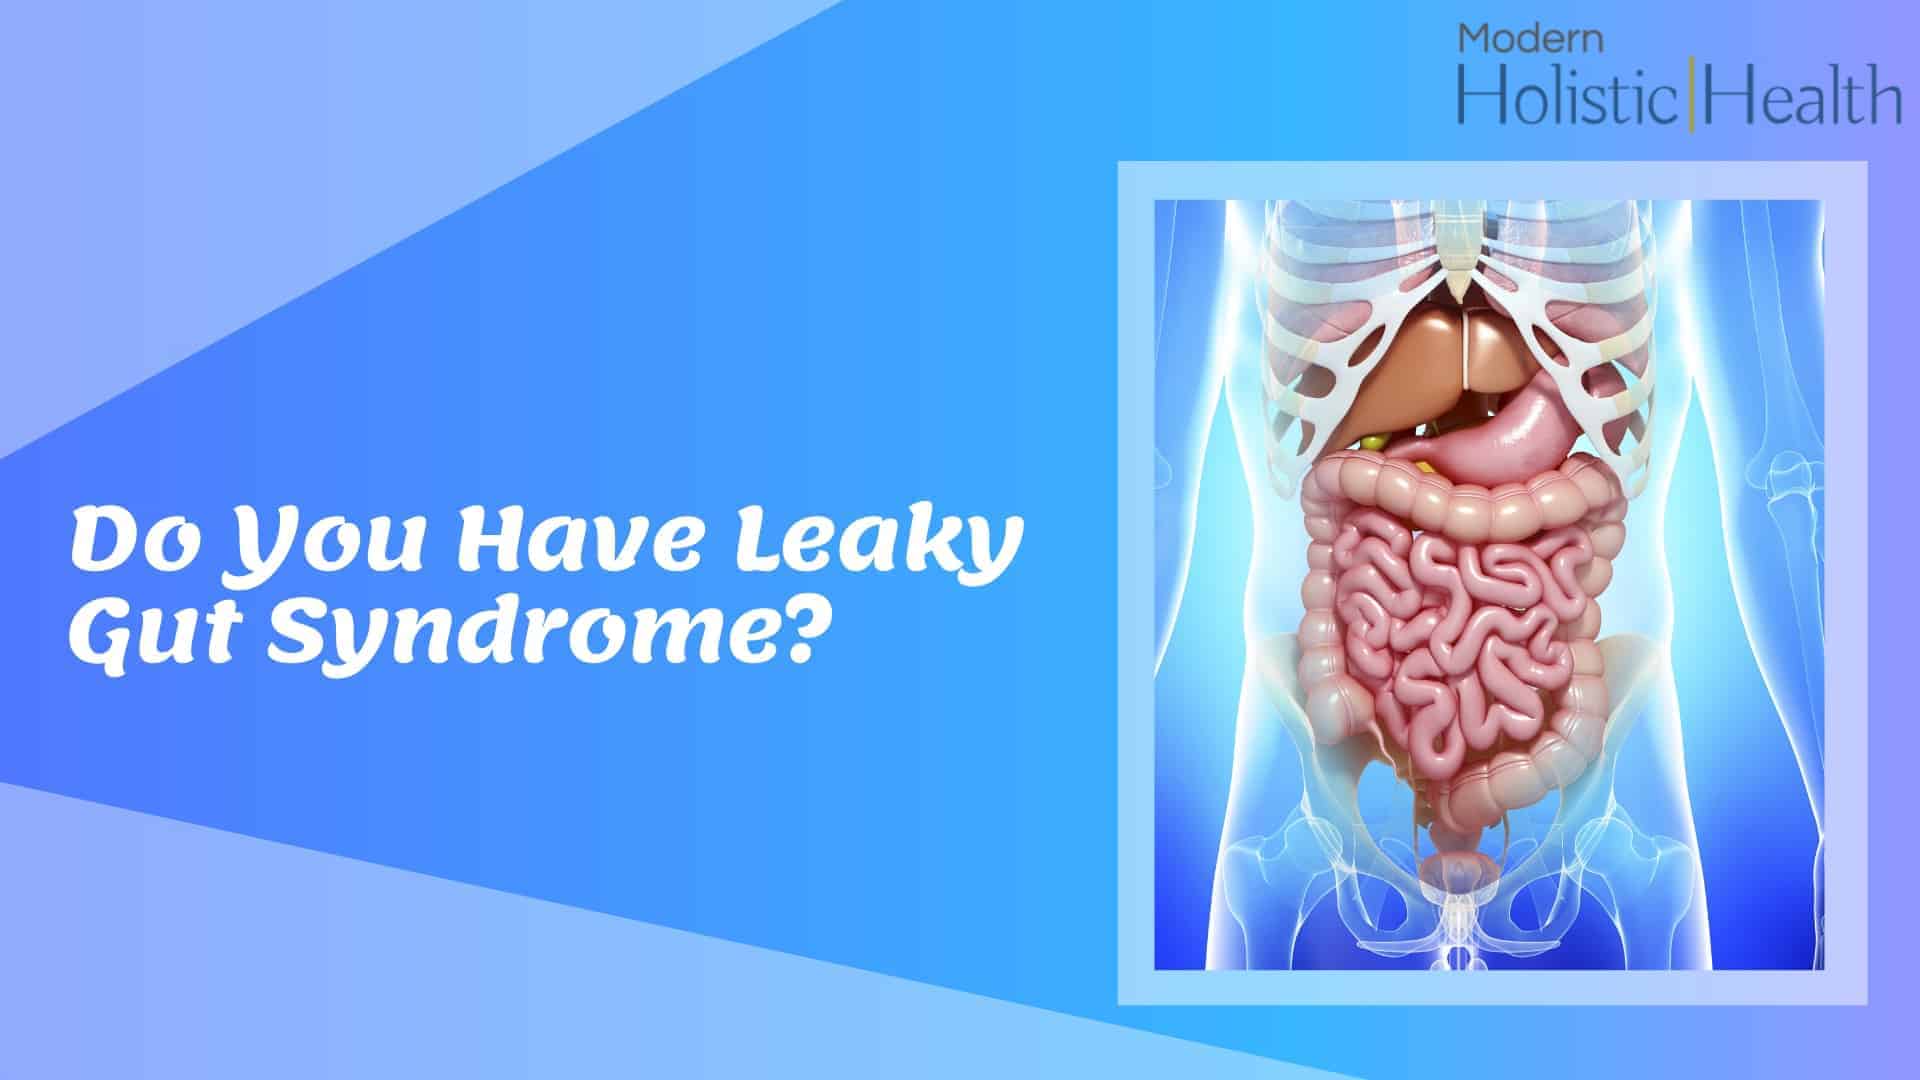 Do you have leaky gut syndrome